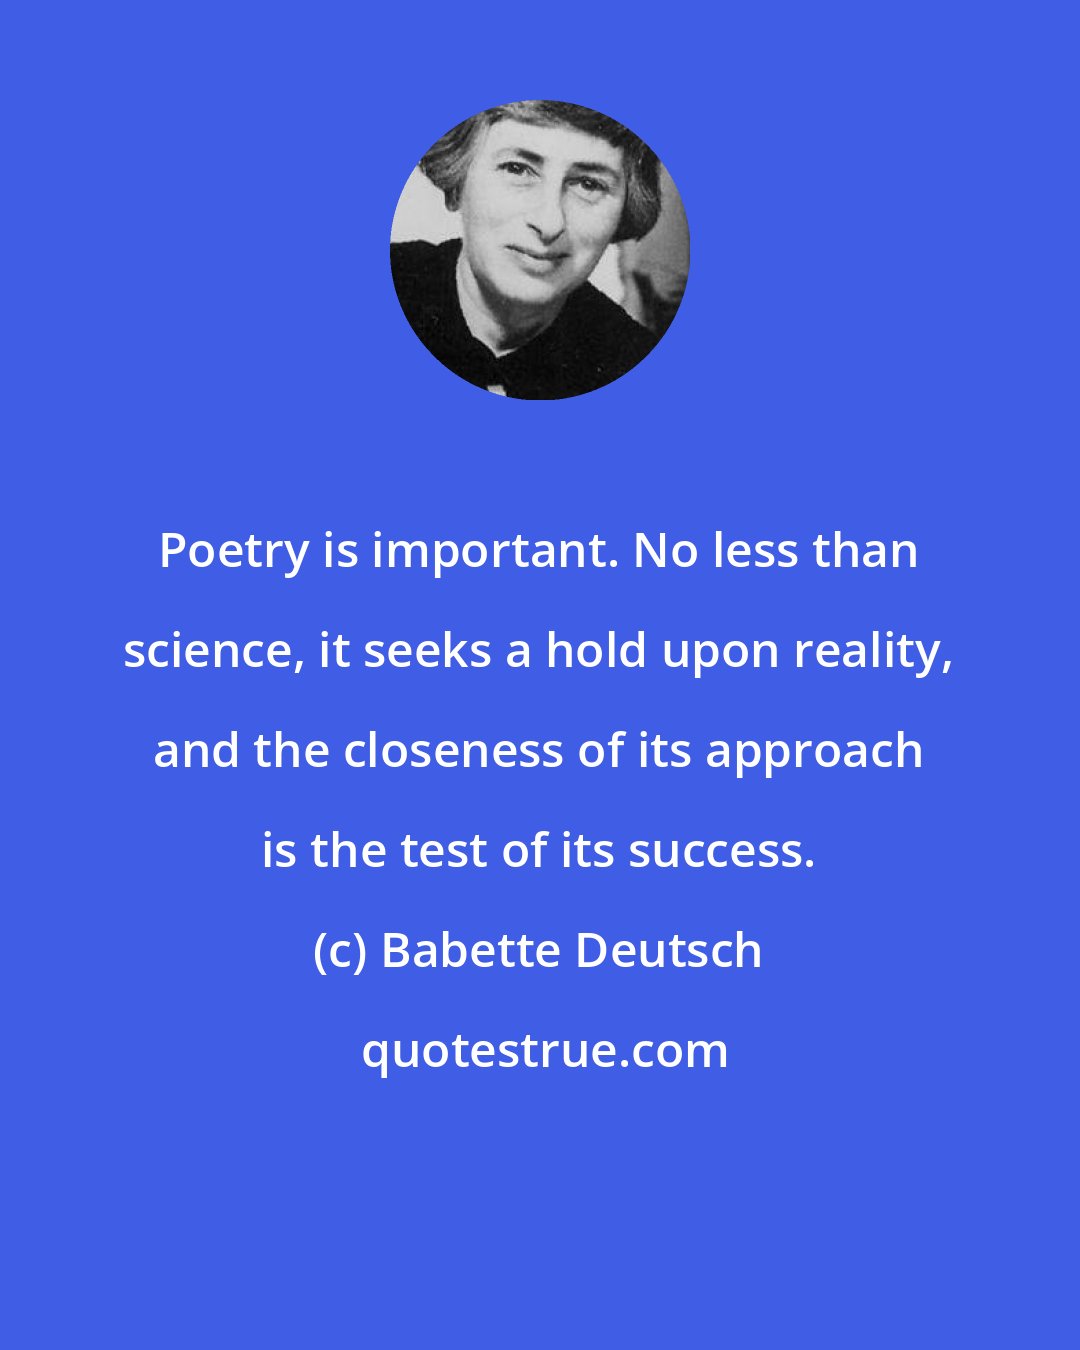 Babette Deutsch: Poetry is important. No less than science, it seeks a hold upon reality, and the closeness of its approach is the test of its success.